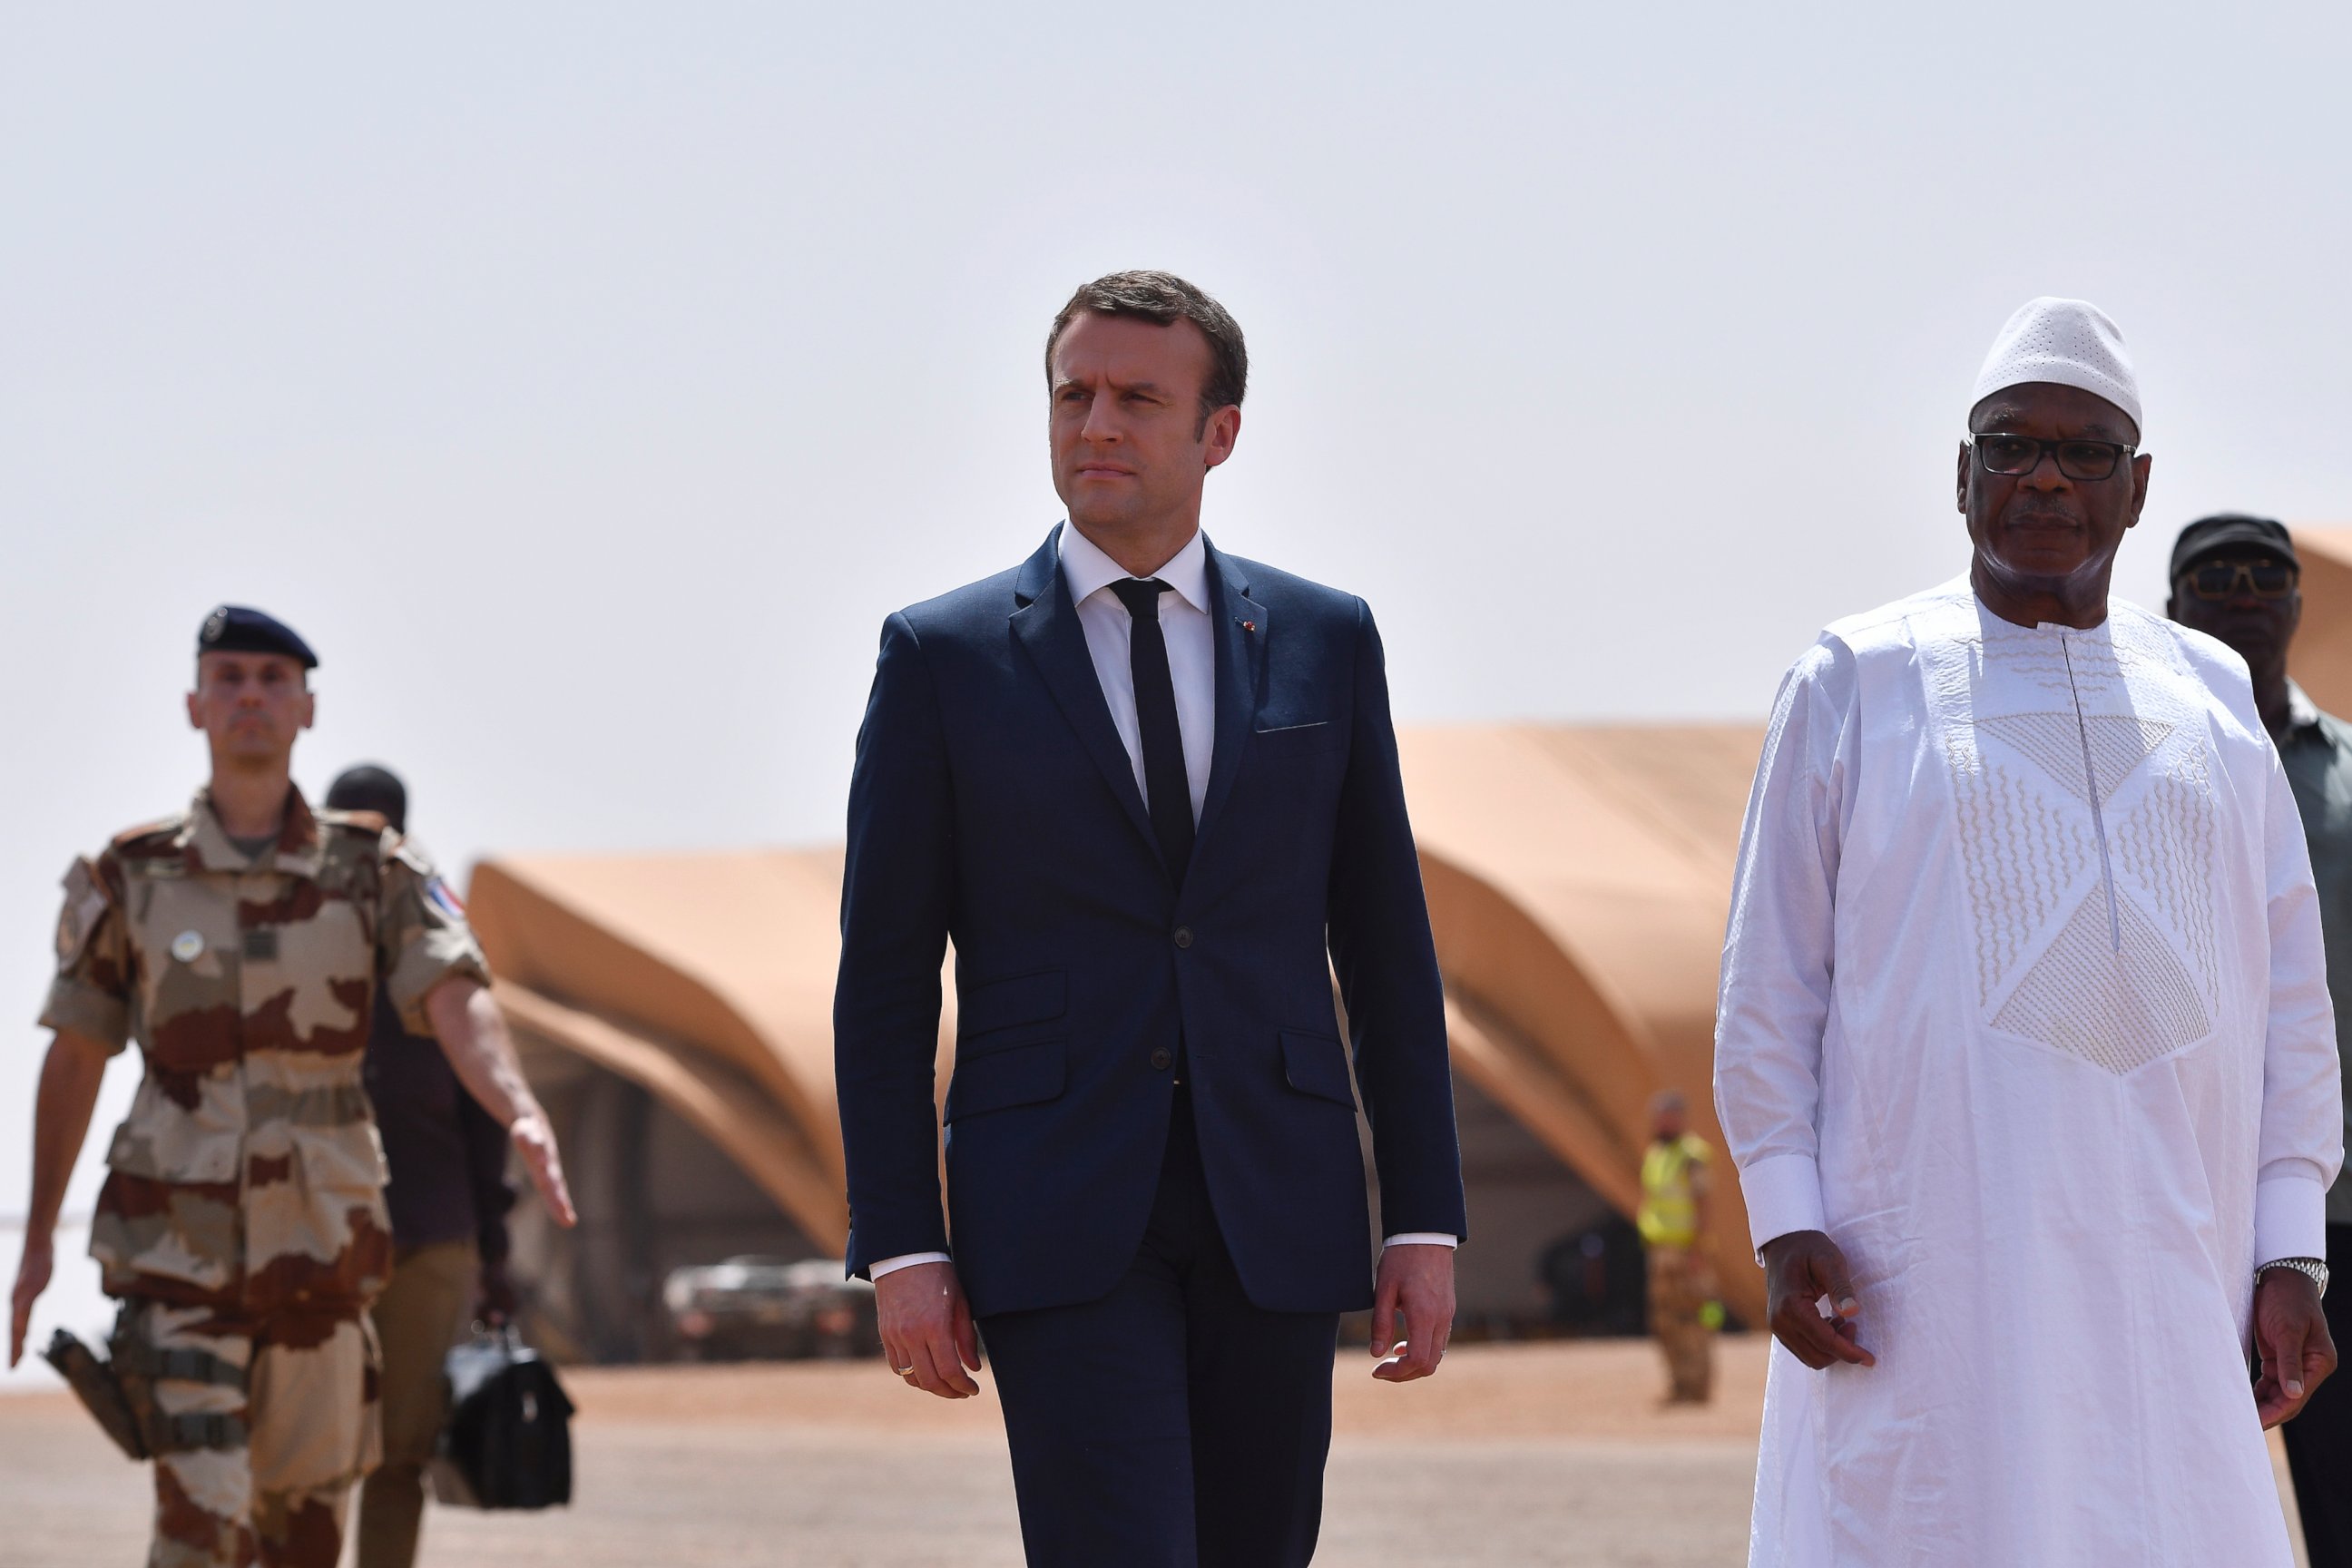 PHOTO: French President Emmanuel Macron during a visit to France's Barkhane counter-terrorism operation in Africa's Sahel region in Gao, northern Mali, May 19,2017.